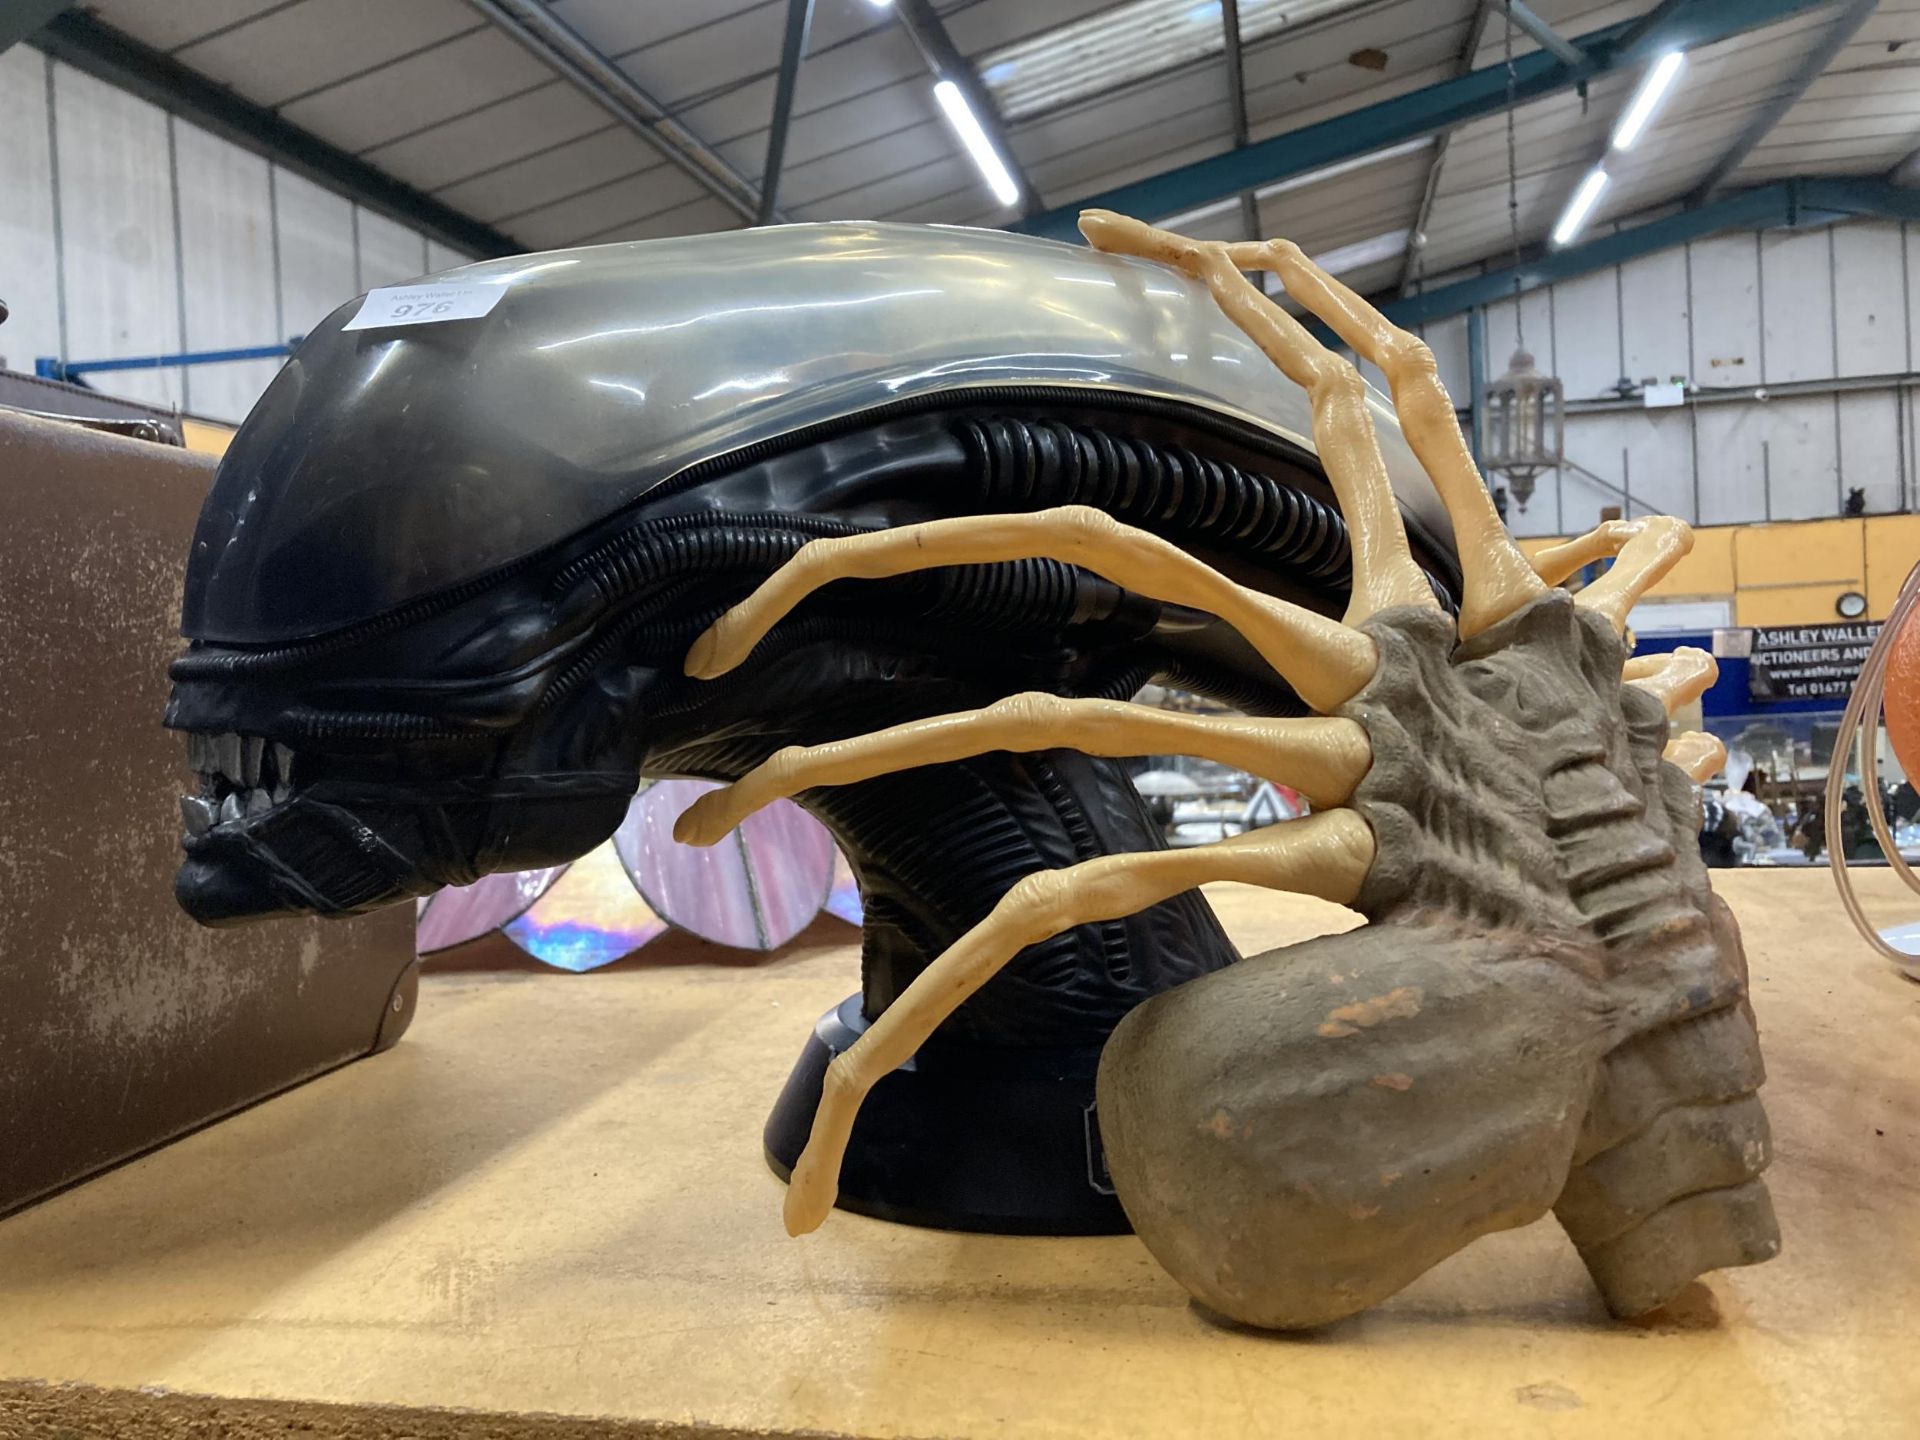 A LARGE ALIEN HEAD AND CLAW CELEBRATING ALIEN 25TH ANNIVERSARY